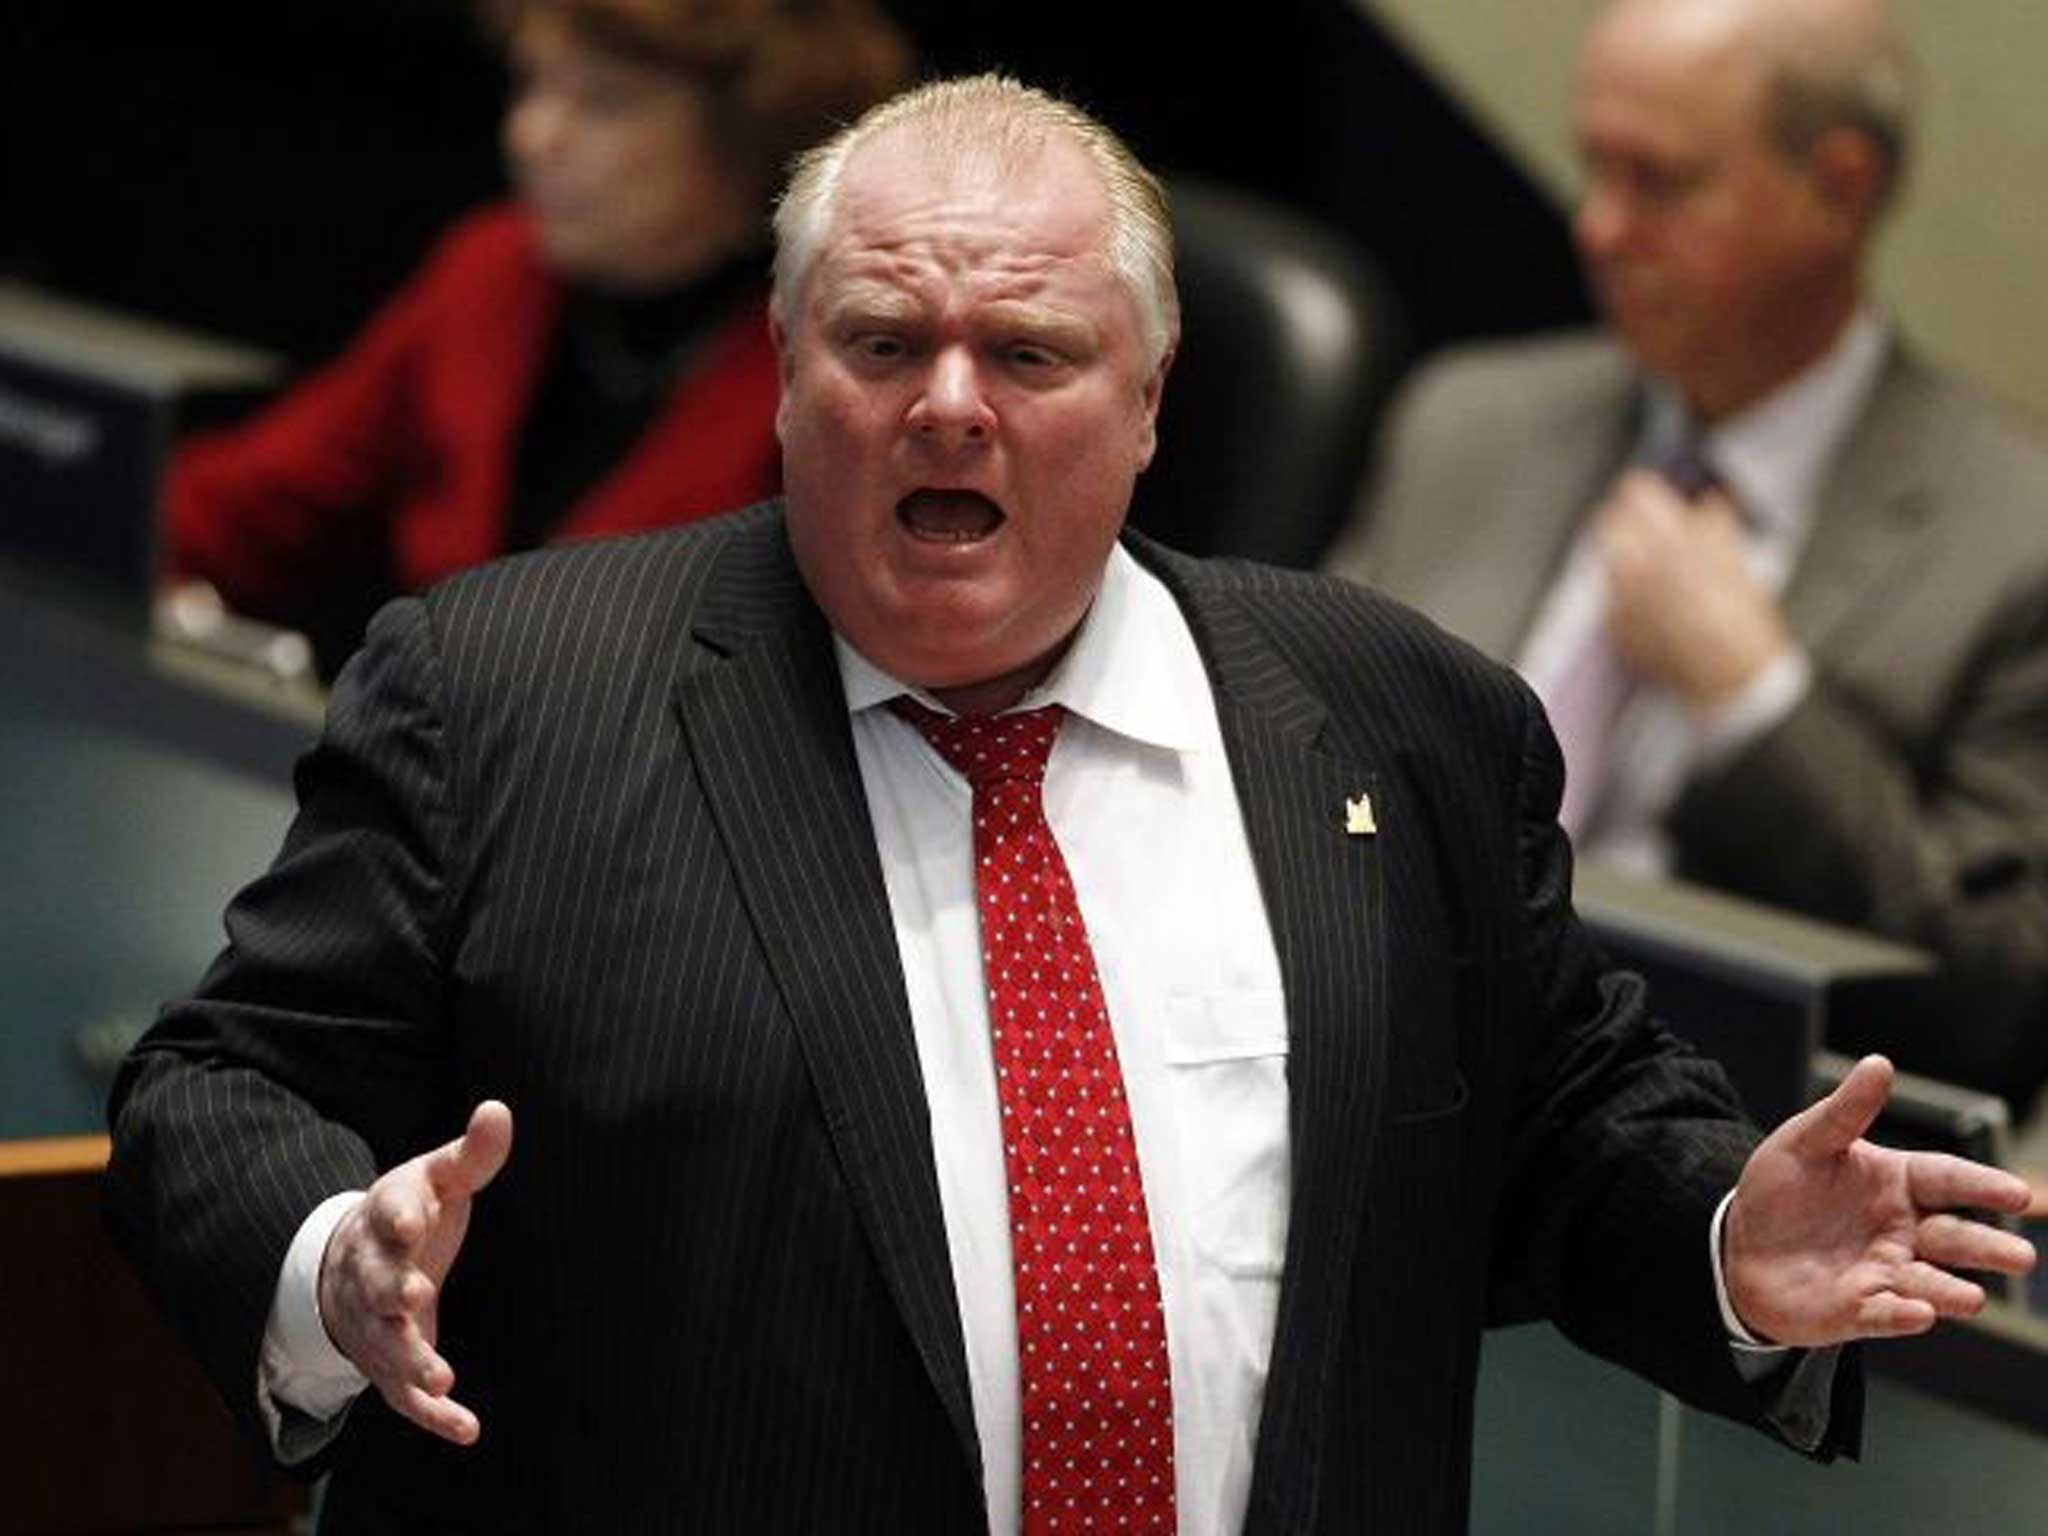 Rob Ford will step down from the Toronto mayoral election after a tumour scare